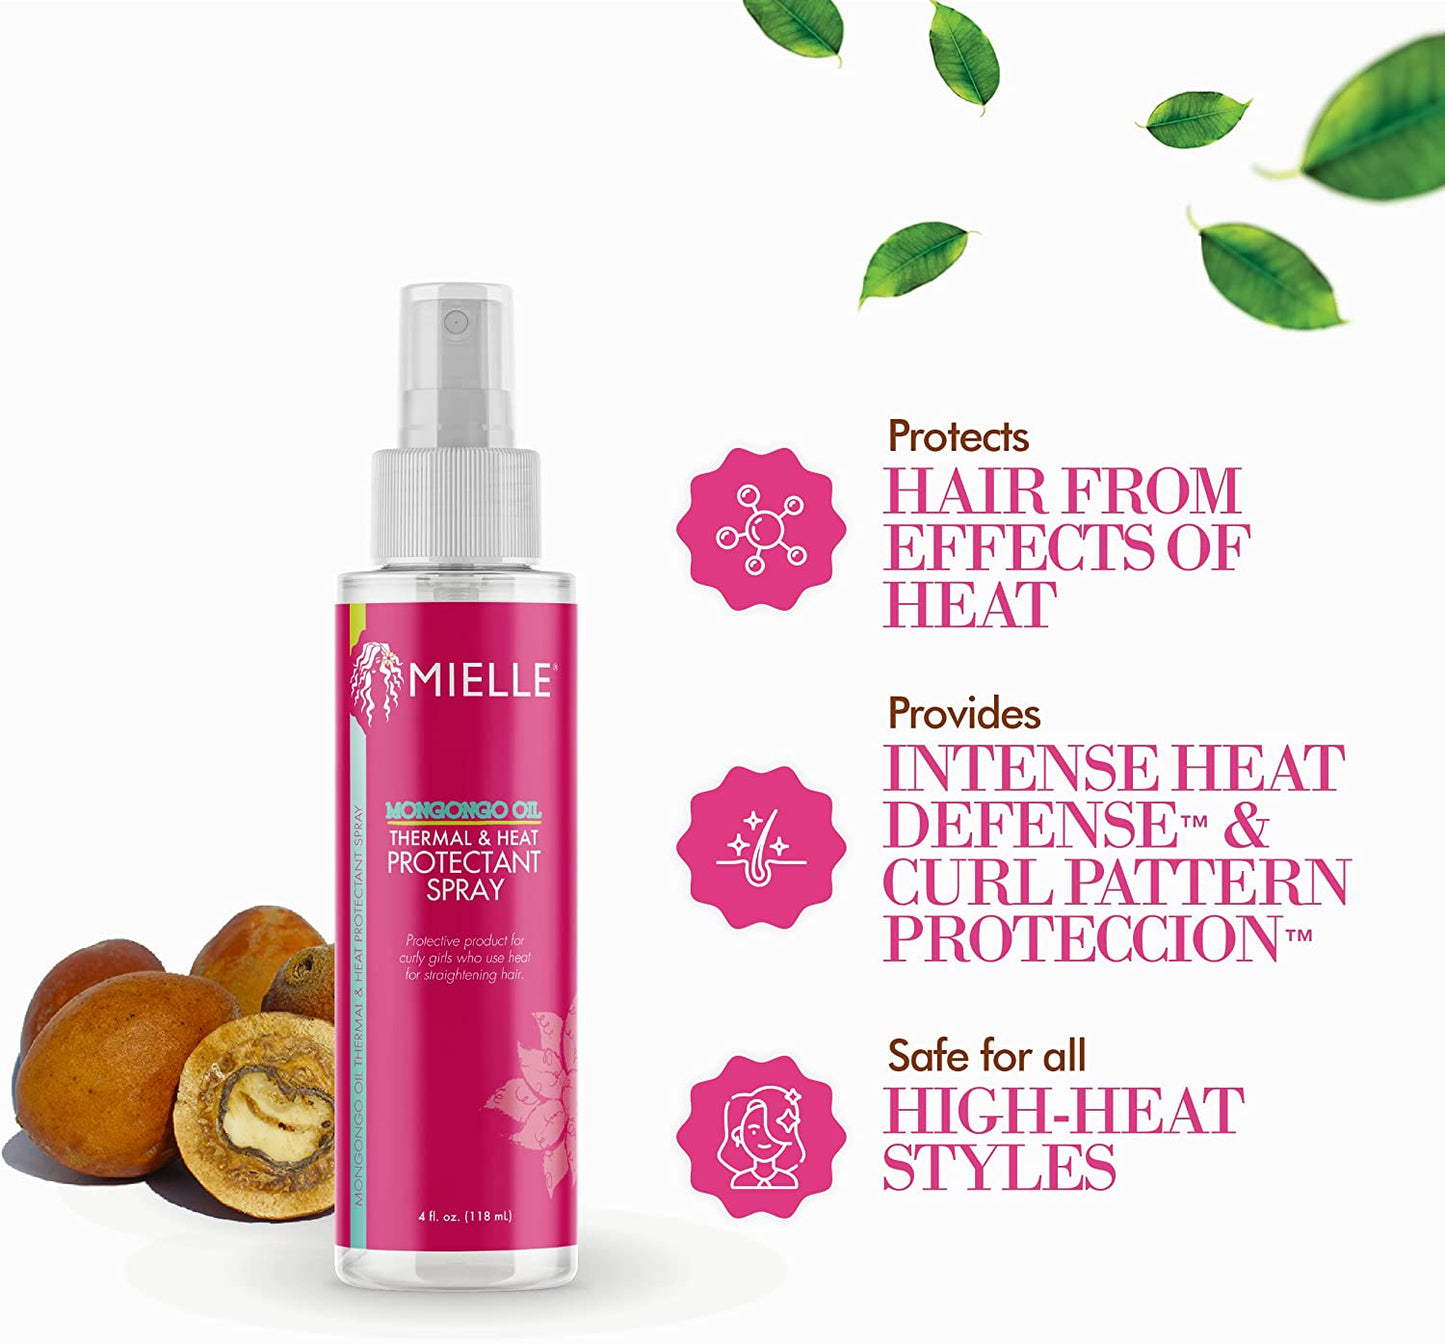 MIELLE | MONGONGO OIL THERMAL & HEAT PROTECTANT SPRAY